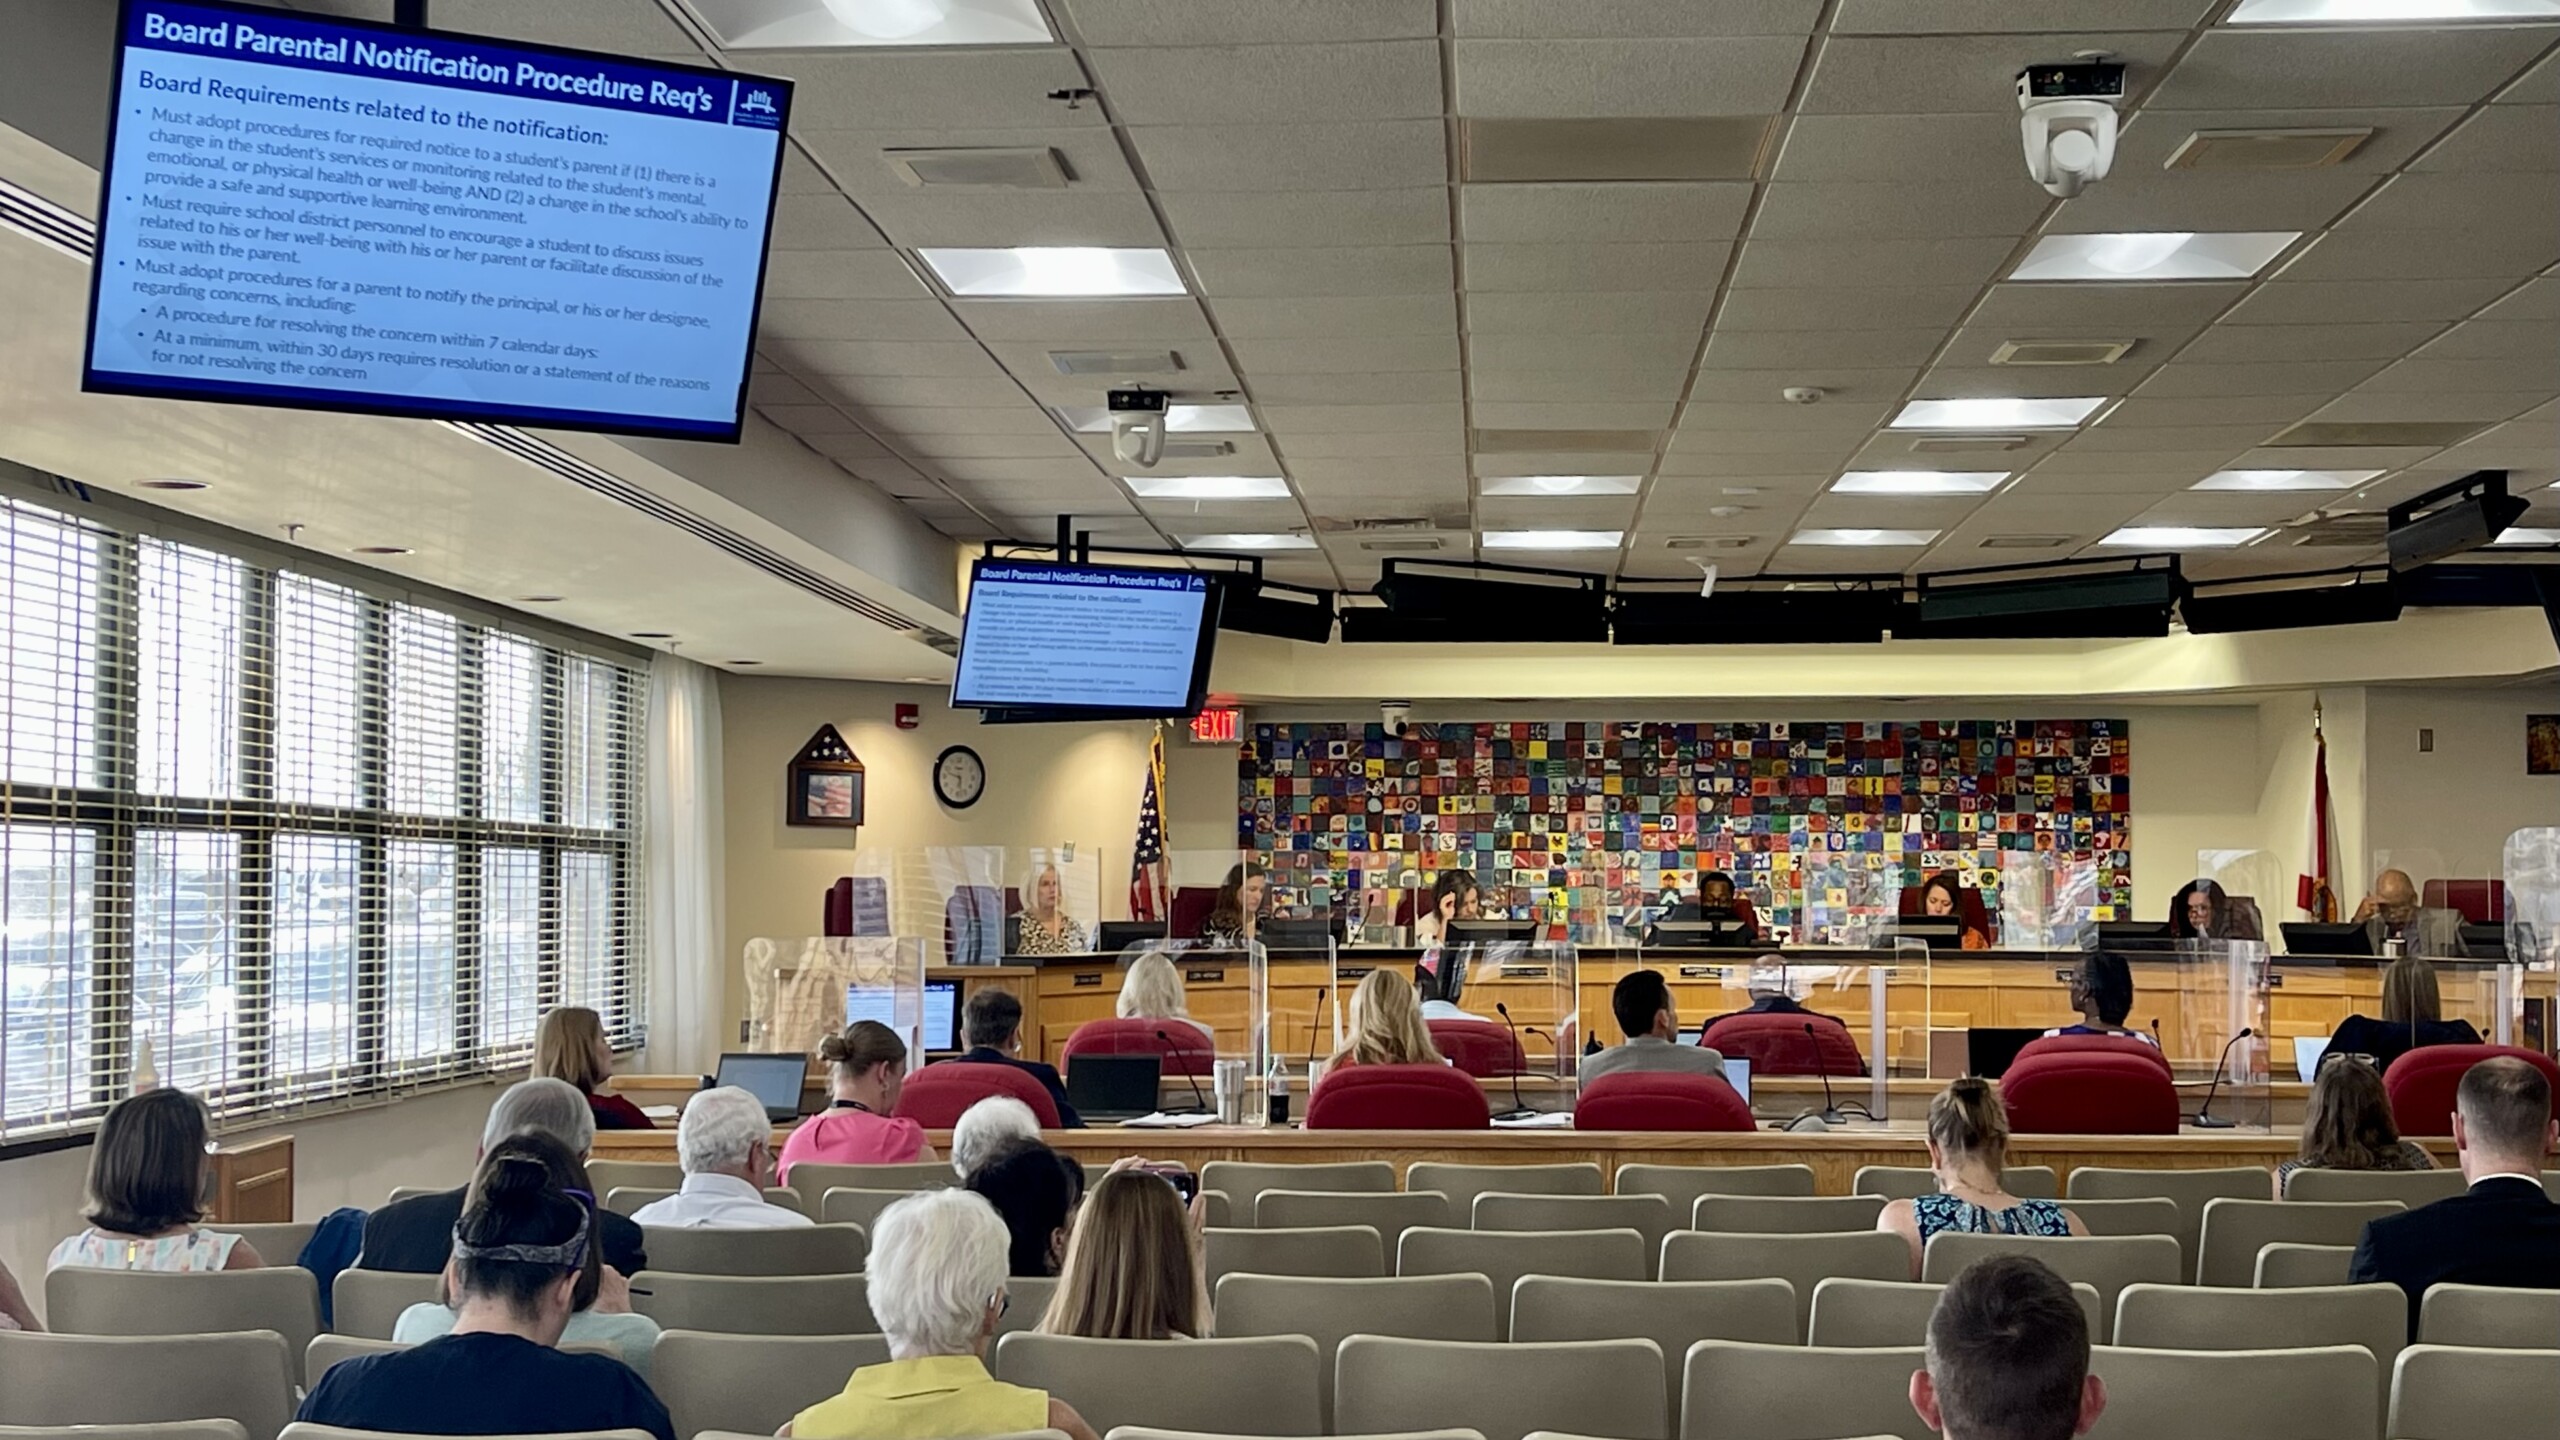 About 2 dozen people are seated in the audience at Duval County Public Schools auditorium. School board members are reviewing a slide that outlines new procedures for parental notification, in response to Florida's new "Parental Rights in Education Law."